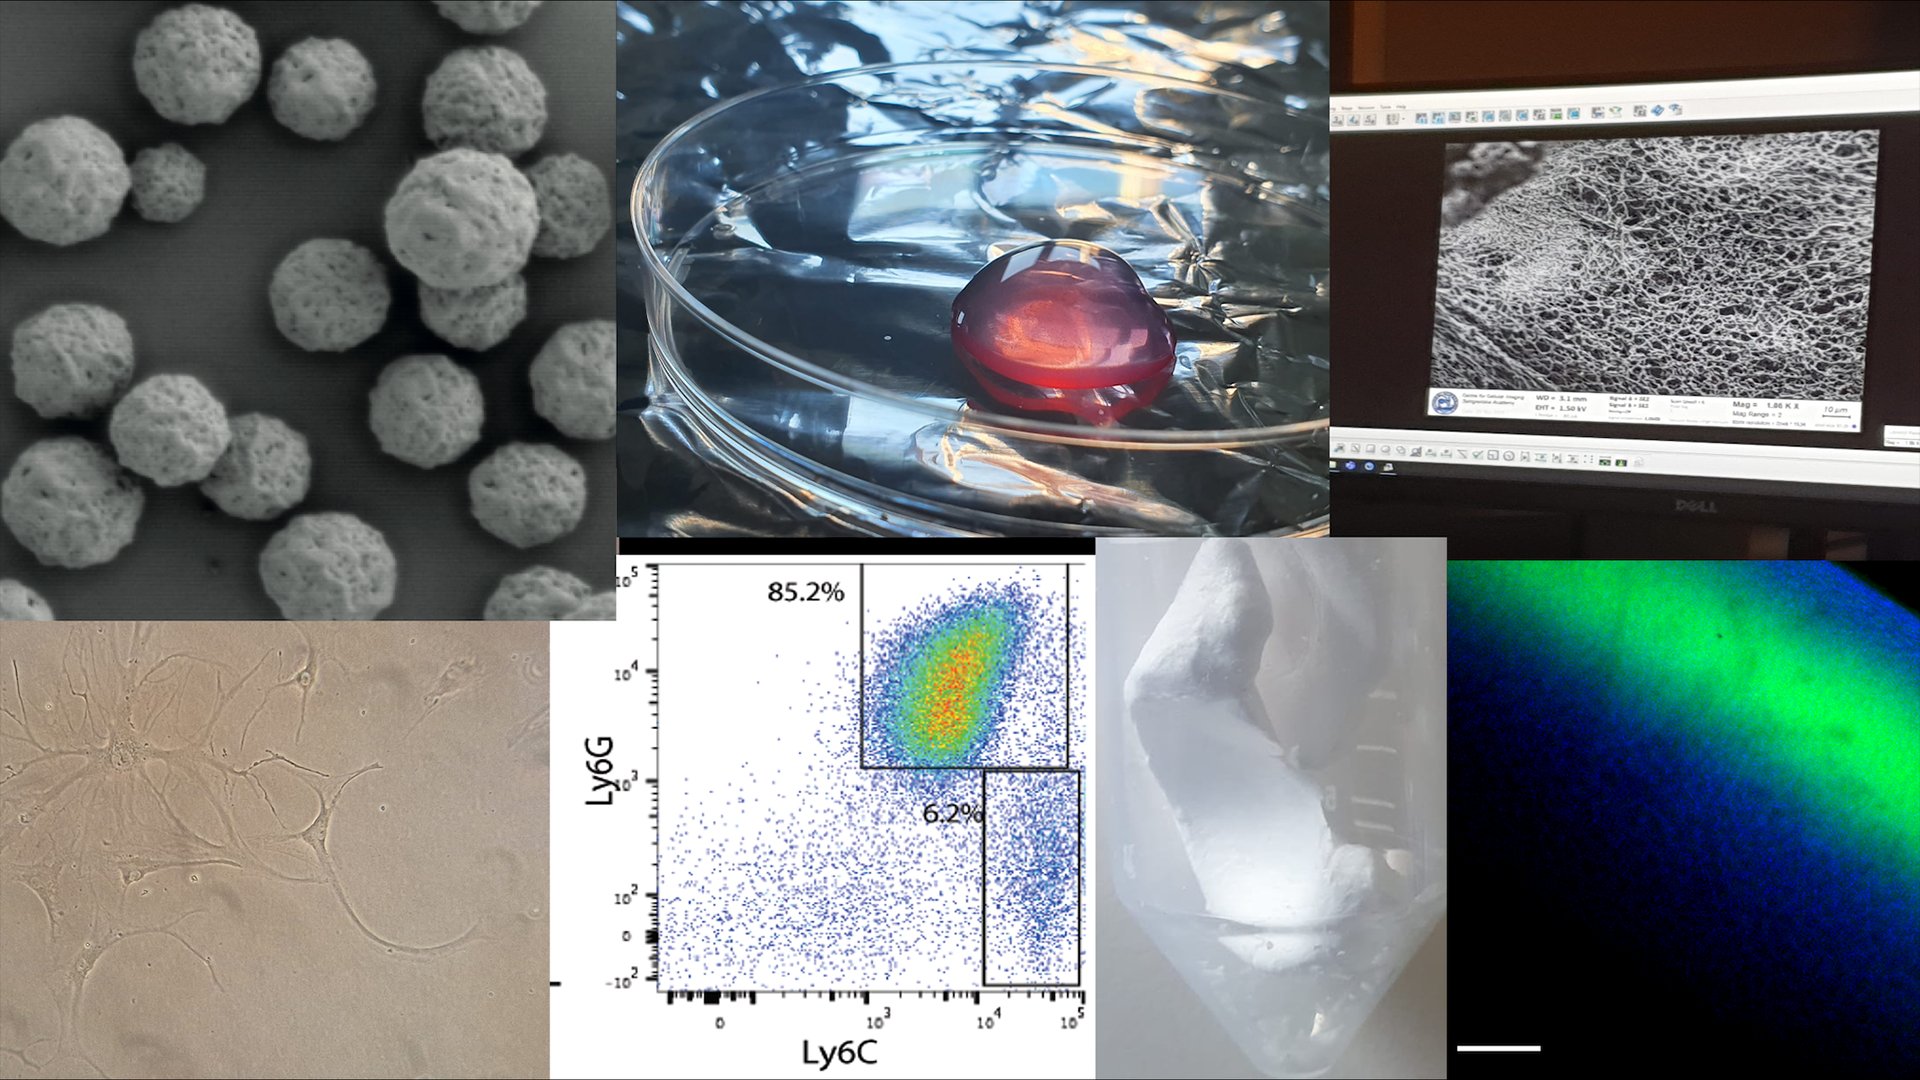 A collage showing different parts of the research groups laboratory experiments